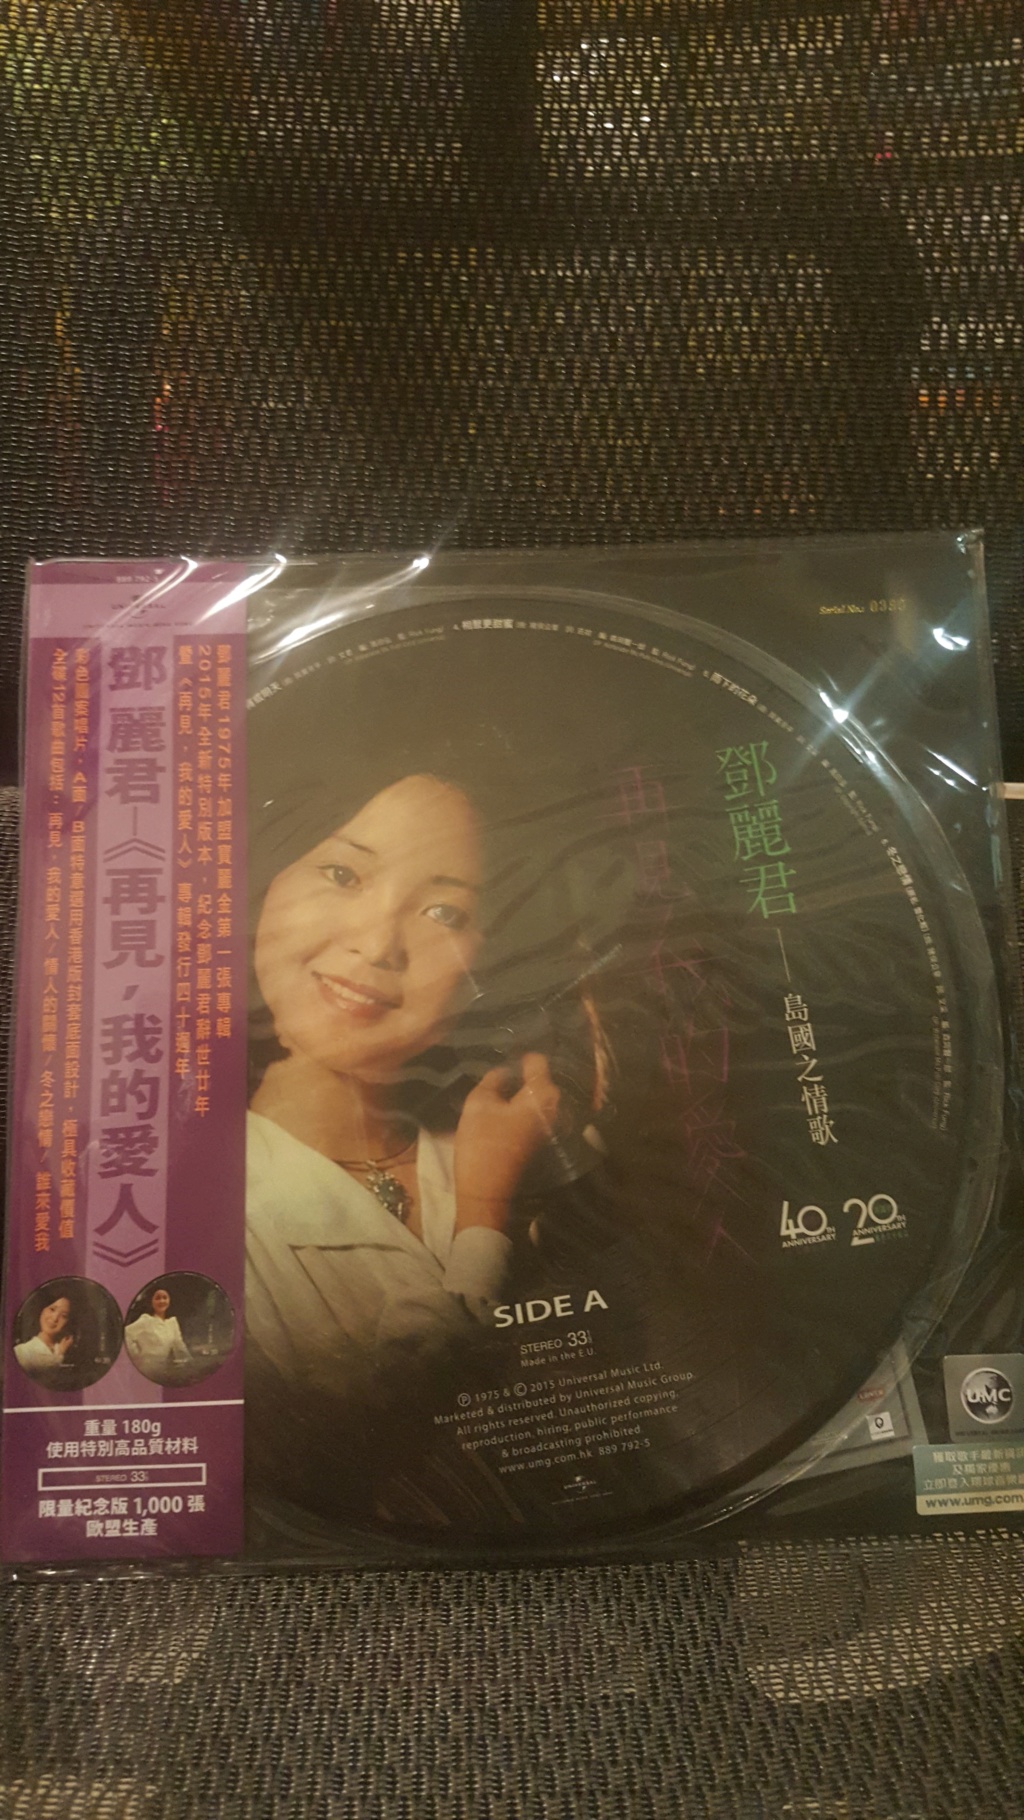 Teresa Teng 邓丽君 Limited Edition Picture and Colour Vinyls (Sold) 20191021